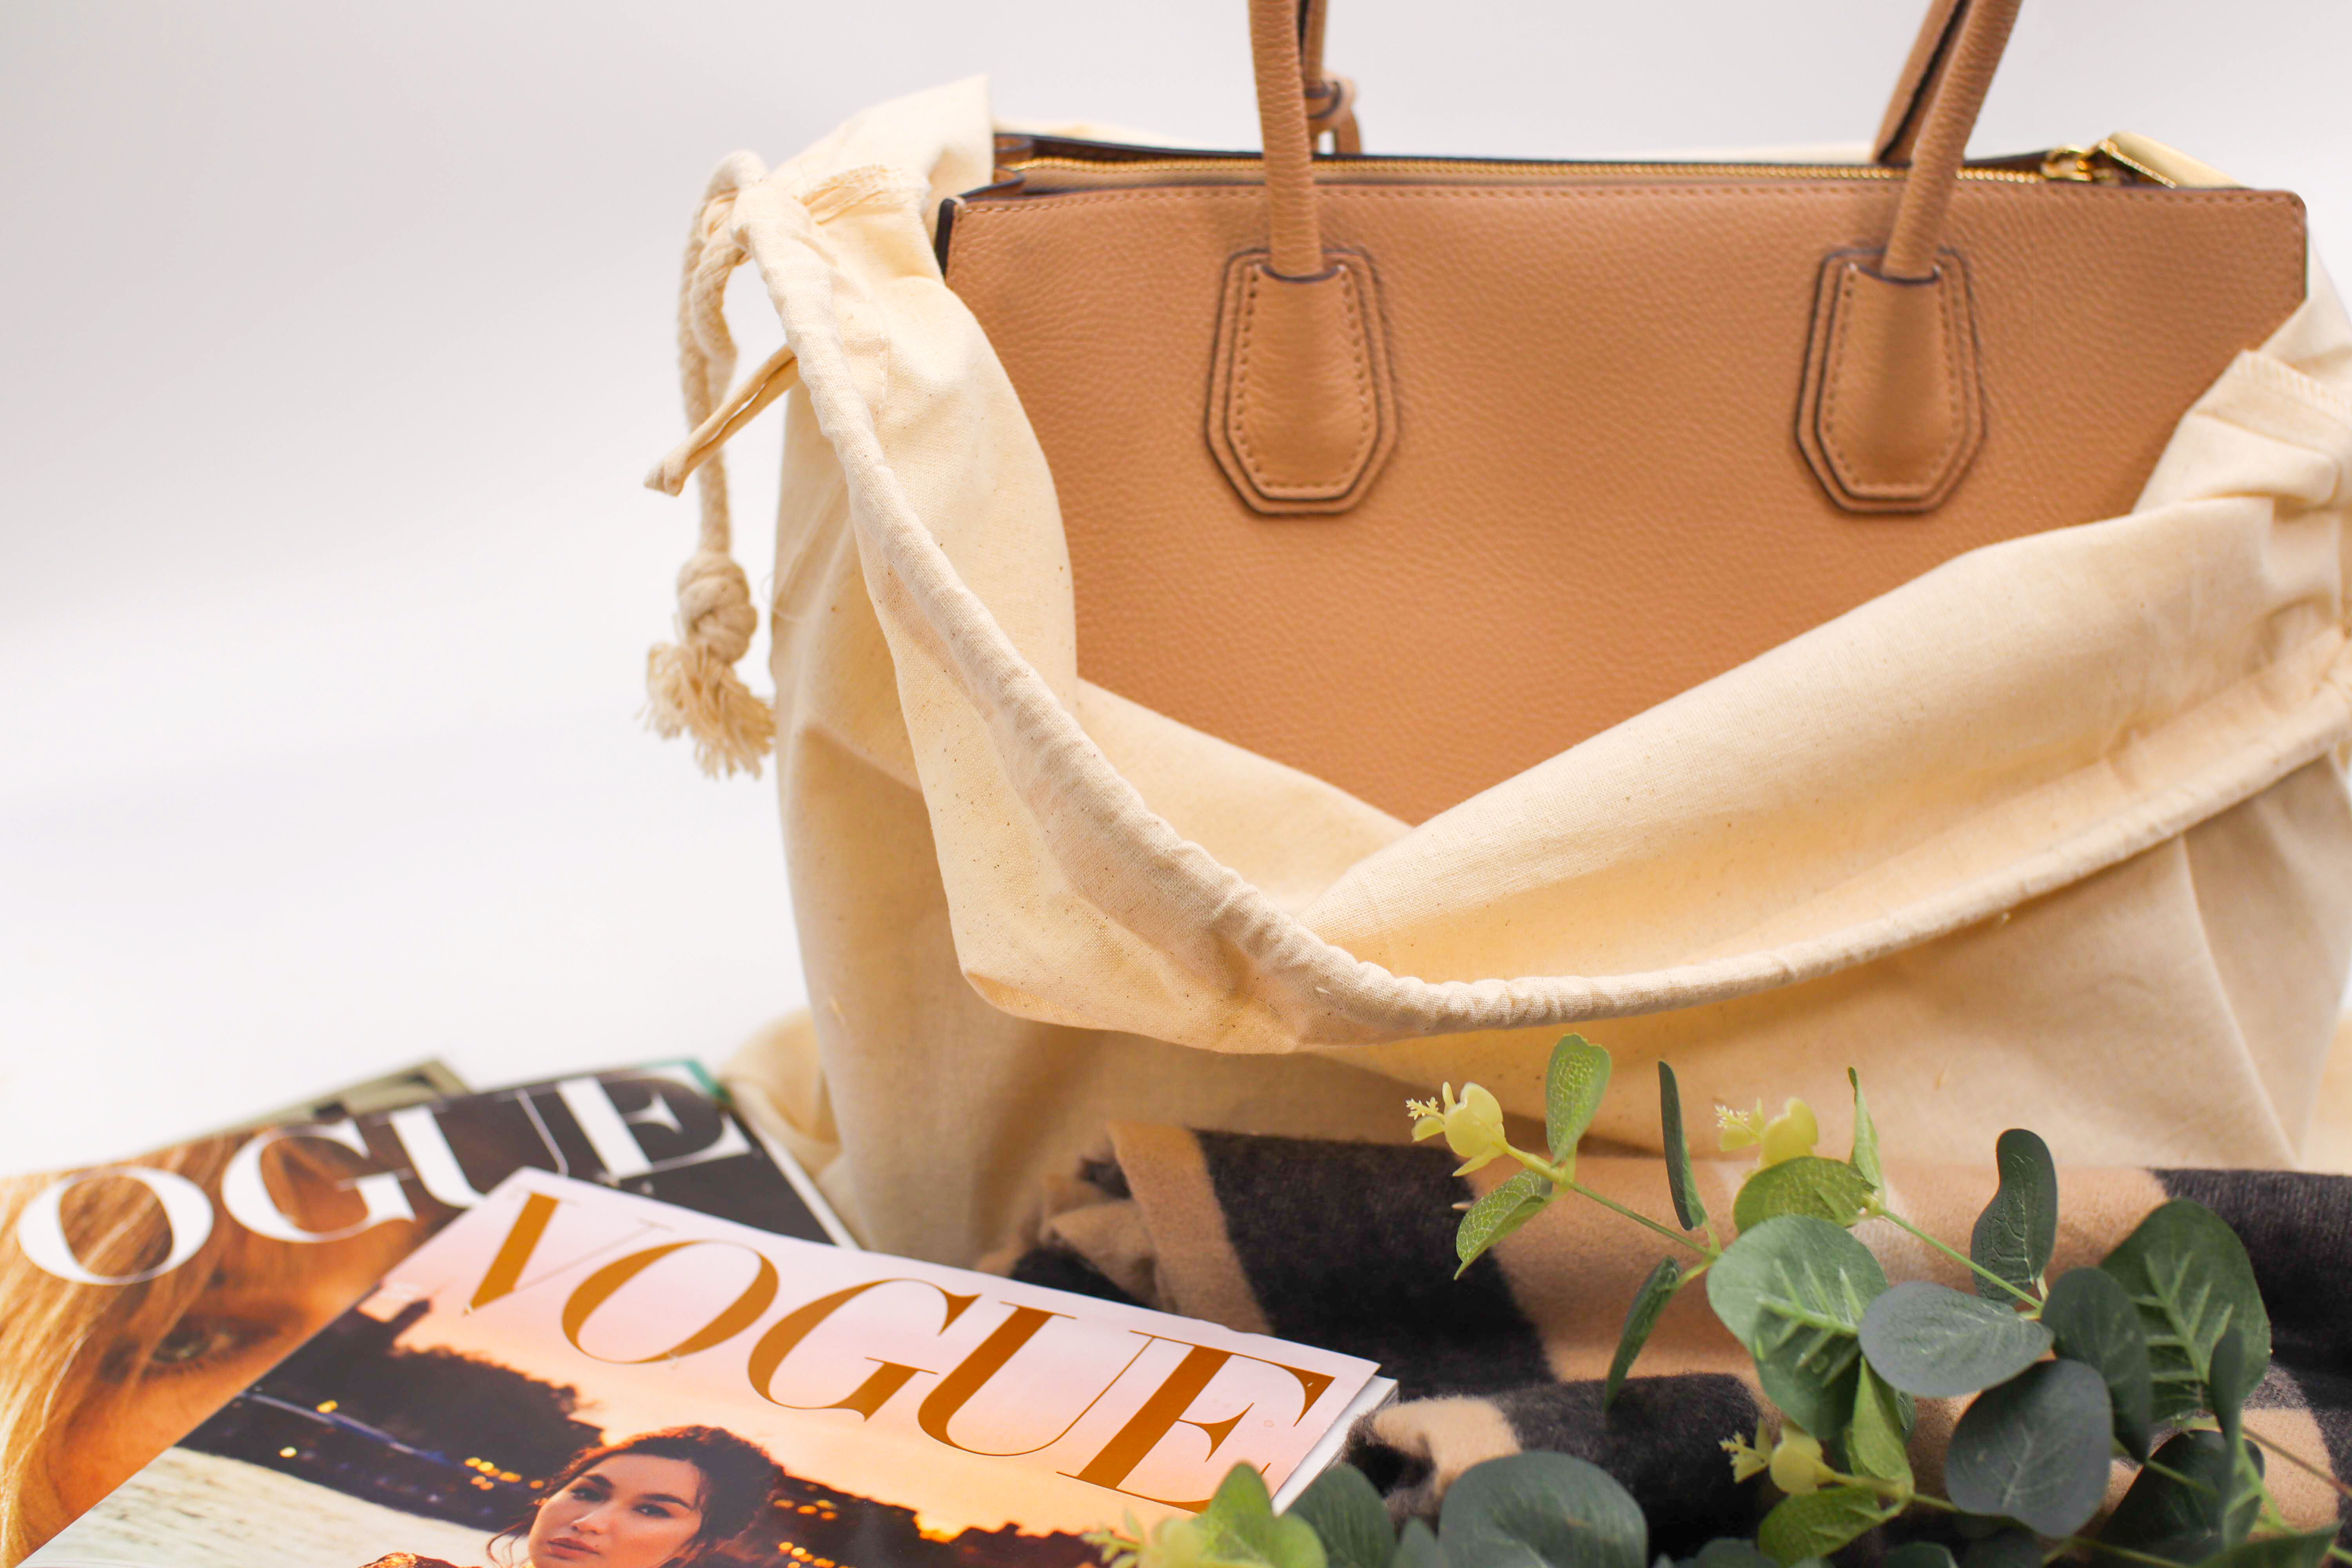 Product photography featuring a luxury handbag